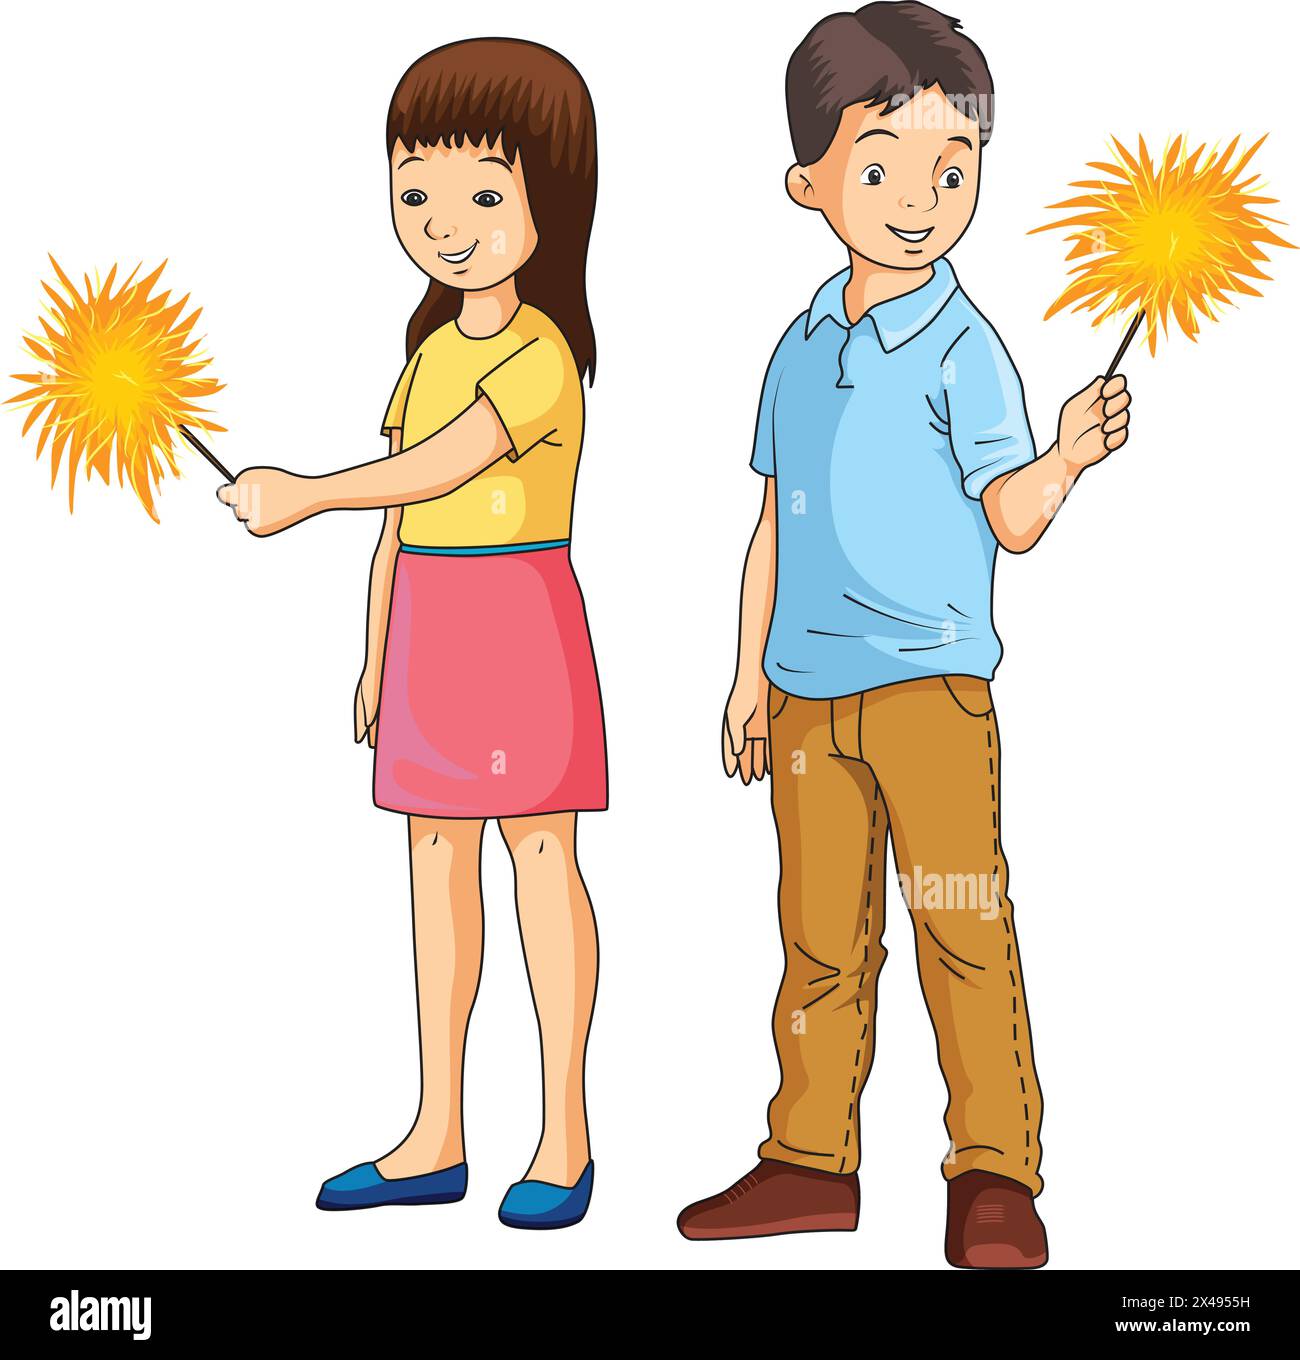 Cute boy and girl celebrating diwali by lighting firecrackers Stock Vector